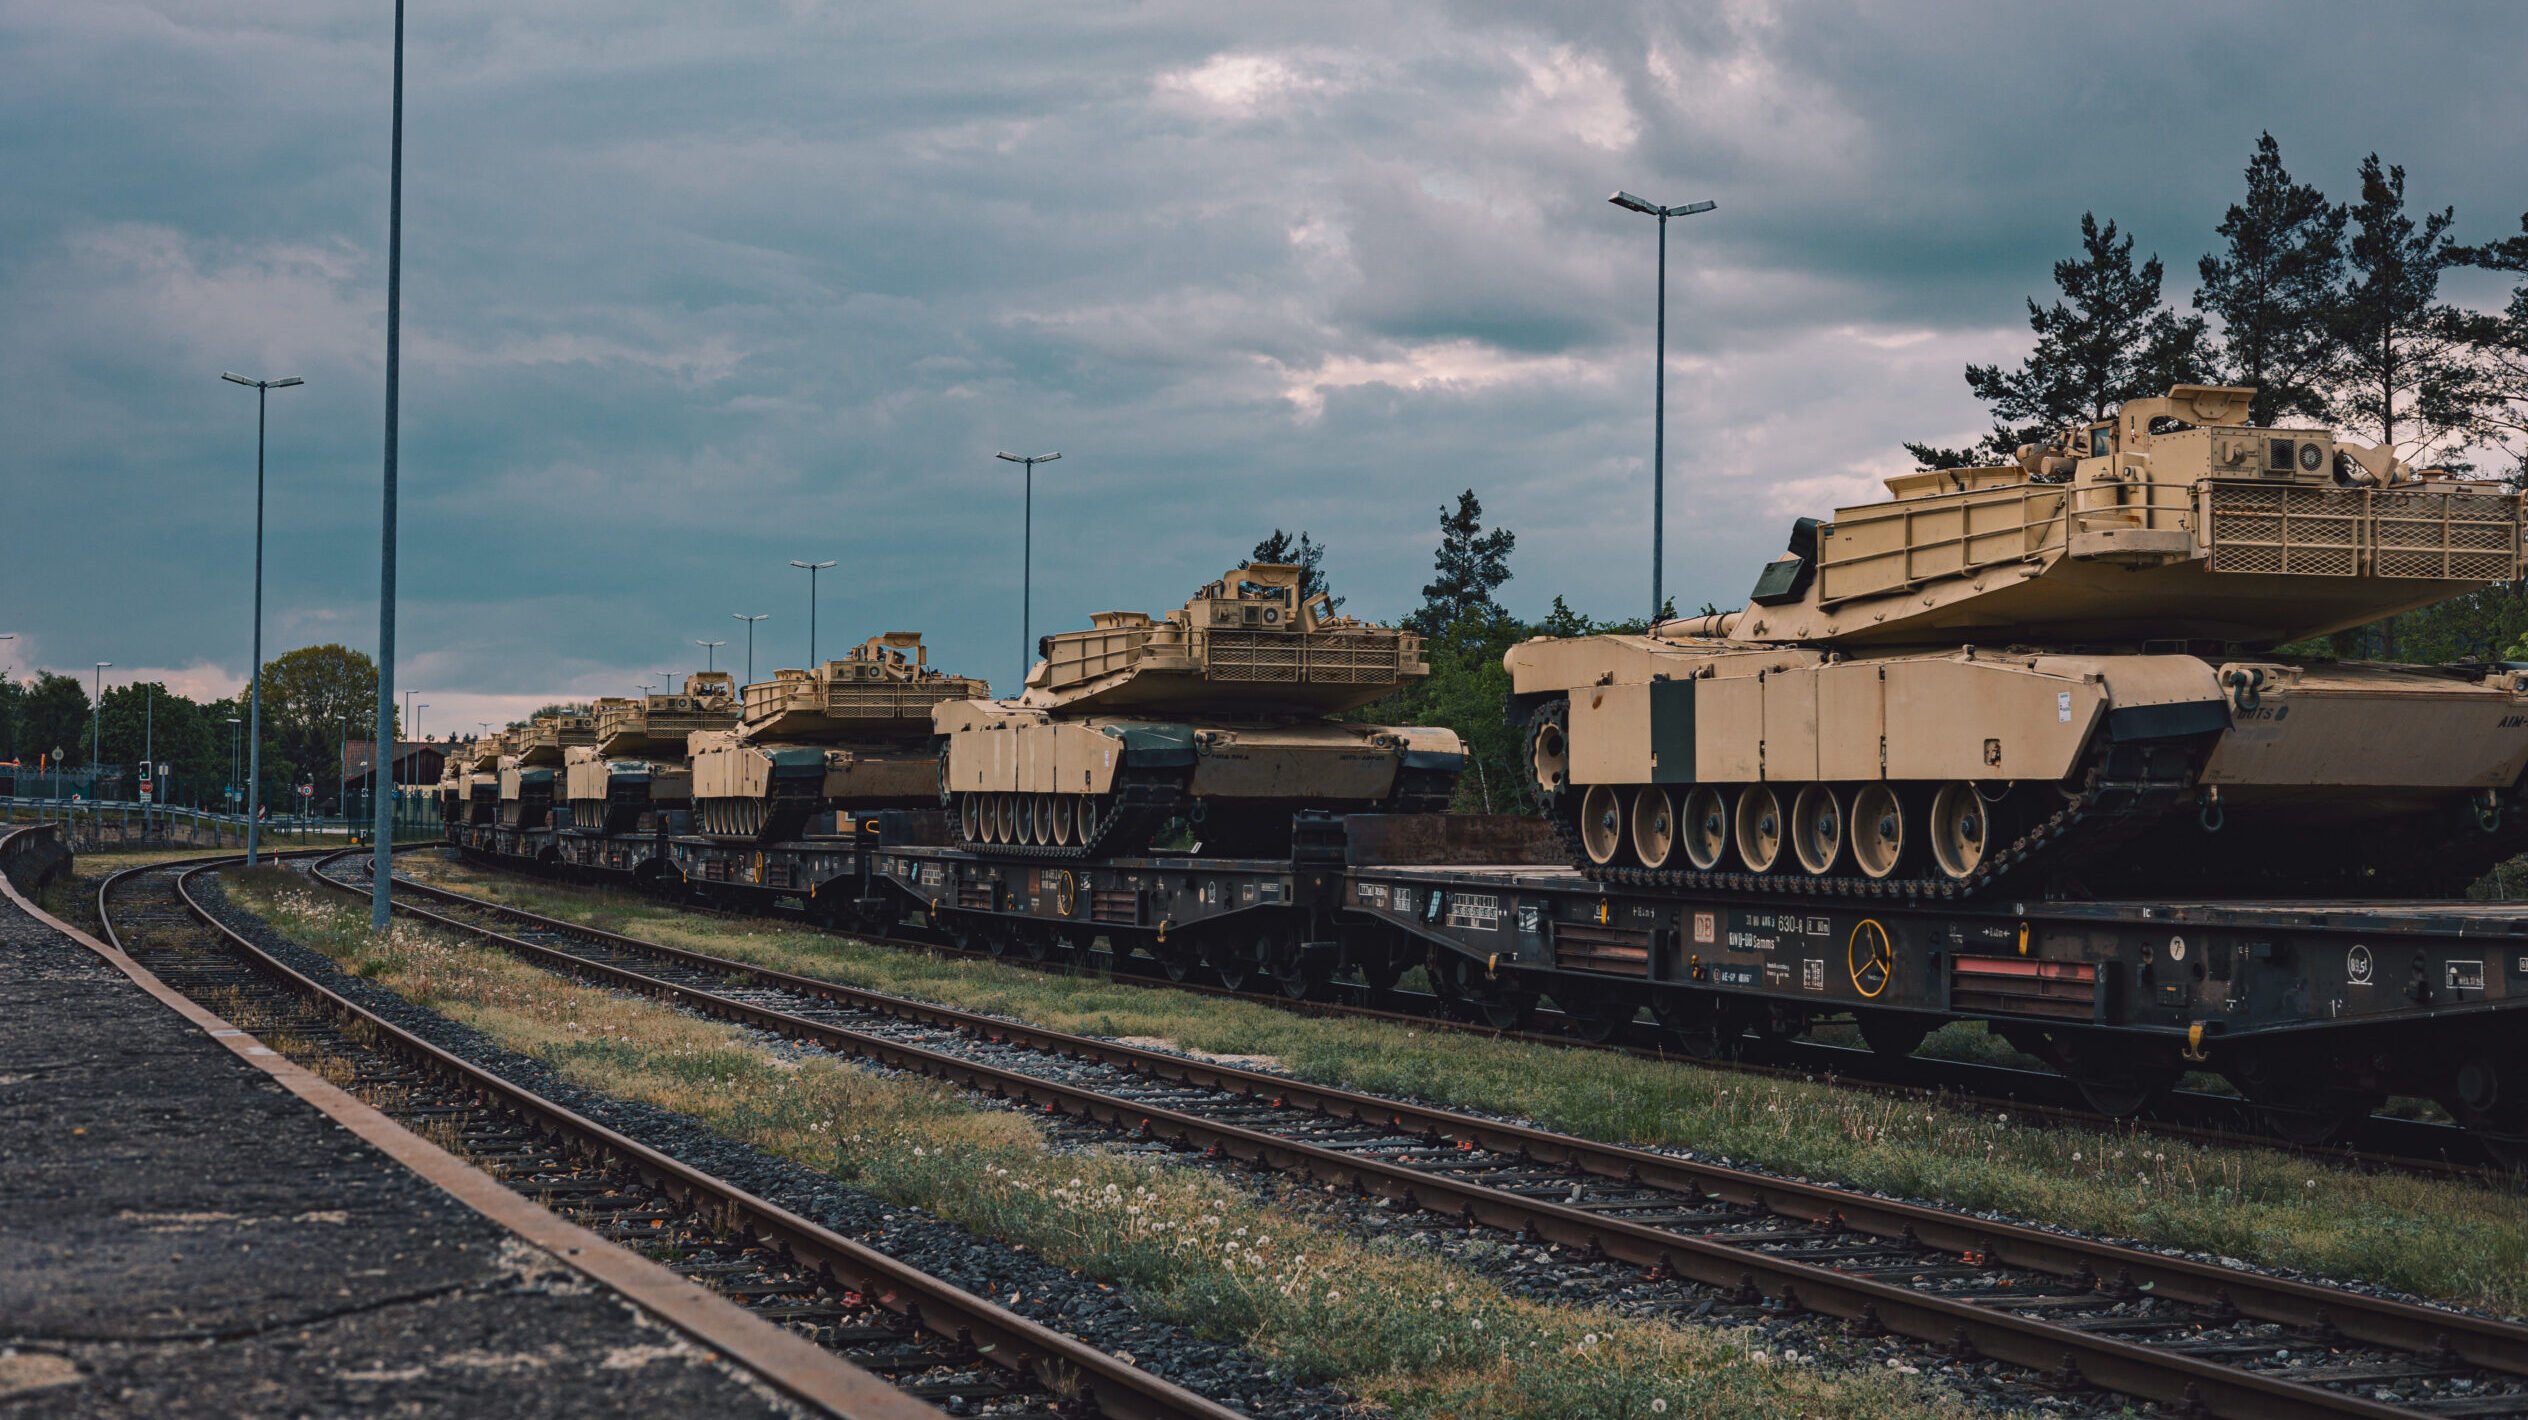 Tanks may face new threats on the modern battlefield, but they’re already adapting